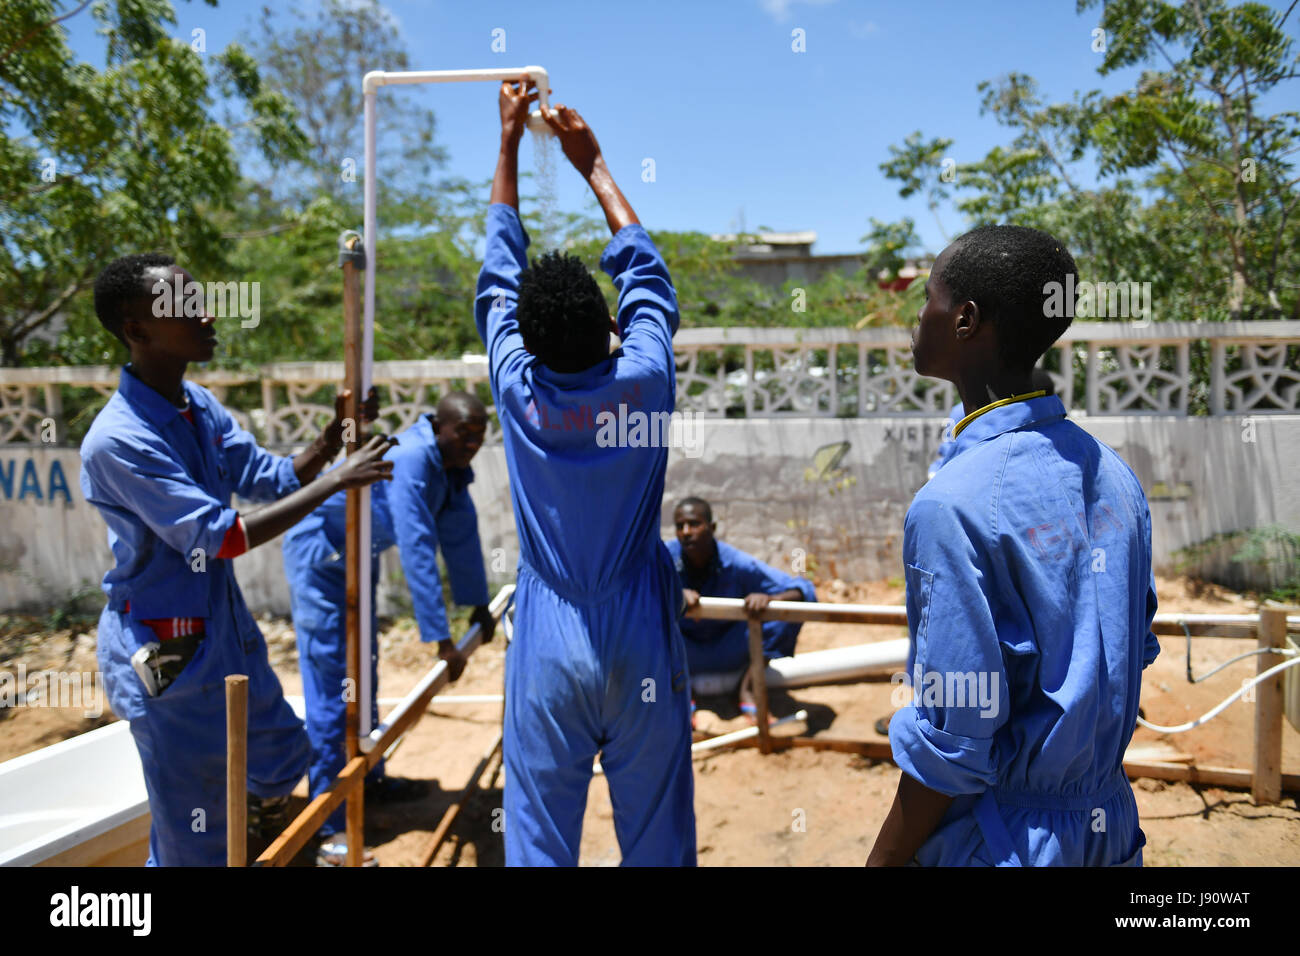 (170531) -- MOGADISHU, May 31, 2017 (Xinhua) -- Trainees test the shower head they installed during a class at the training centre ELMAN, a non-government organization (NGO) which cooperates with the United Nations Children's Fund (UNICEF), in Mogadishu, Somalia, March 22, 2017. By the year of 2017, more than 1630 children and teenagers have taken vocational training courses such as automobile maintenance, basic electricity knowledge and circuit maintenance skills, mobile phone repairing and computer using. A vast majority of the students here were former child soldiers or affected by armed gr Stock Photo